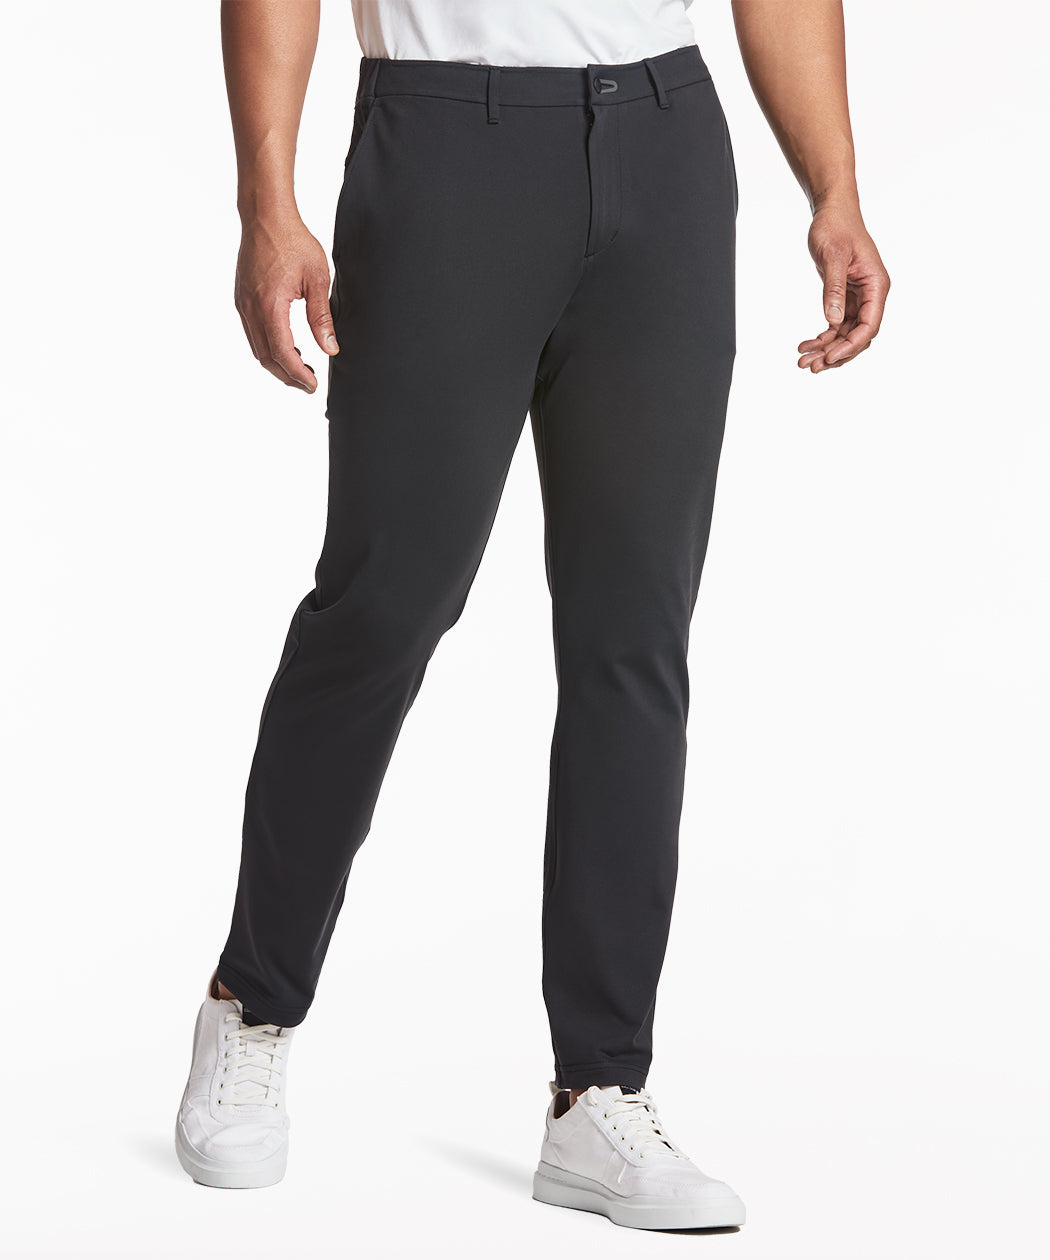 All Day Everyday 5 Pocket Pant Black